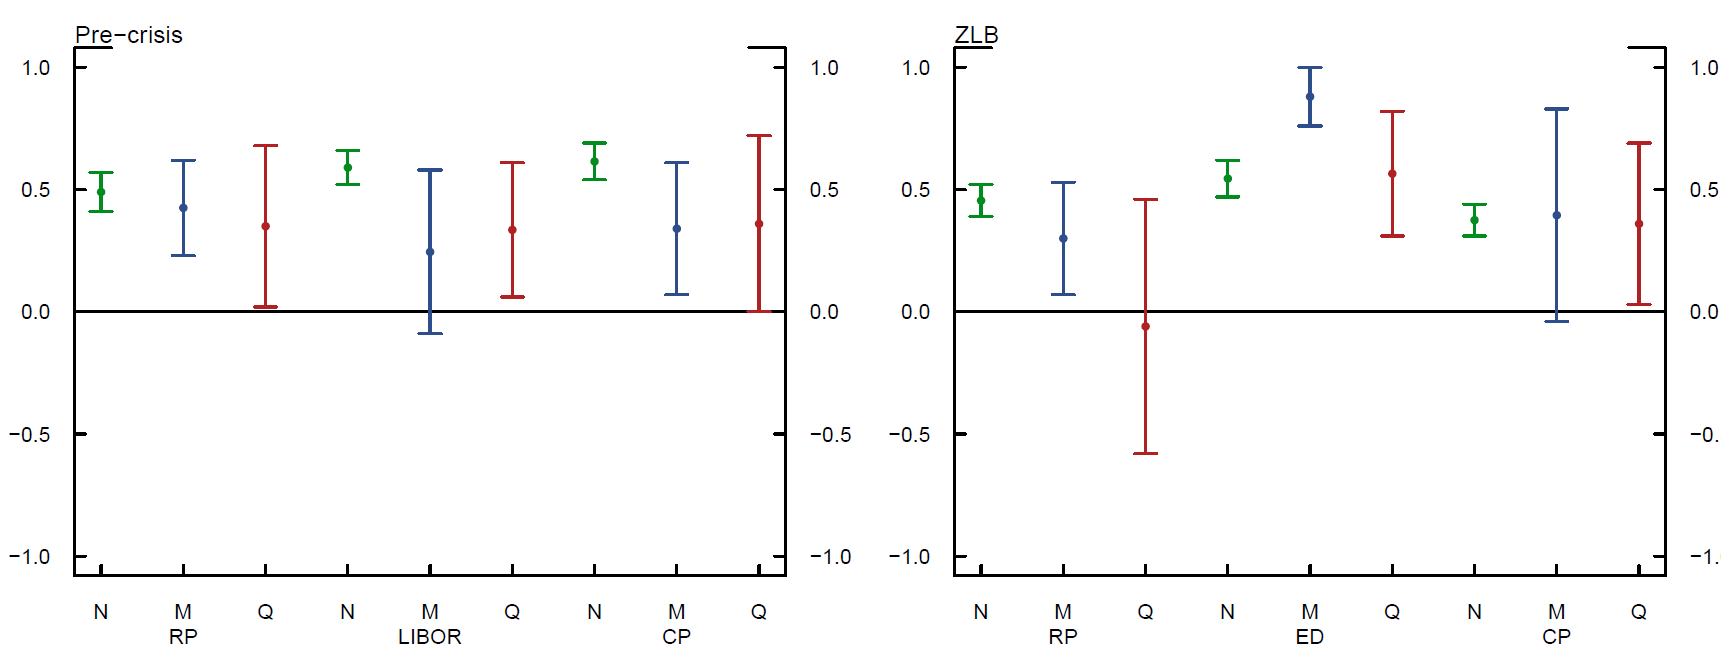 Figure 1: Correlations of FFR with the Other Rates: Pre-crisis vs. ZLB. See accessible link for data.